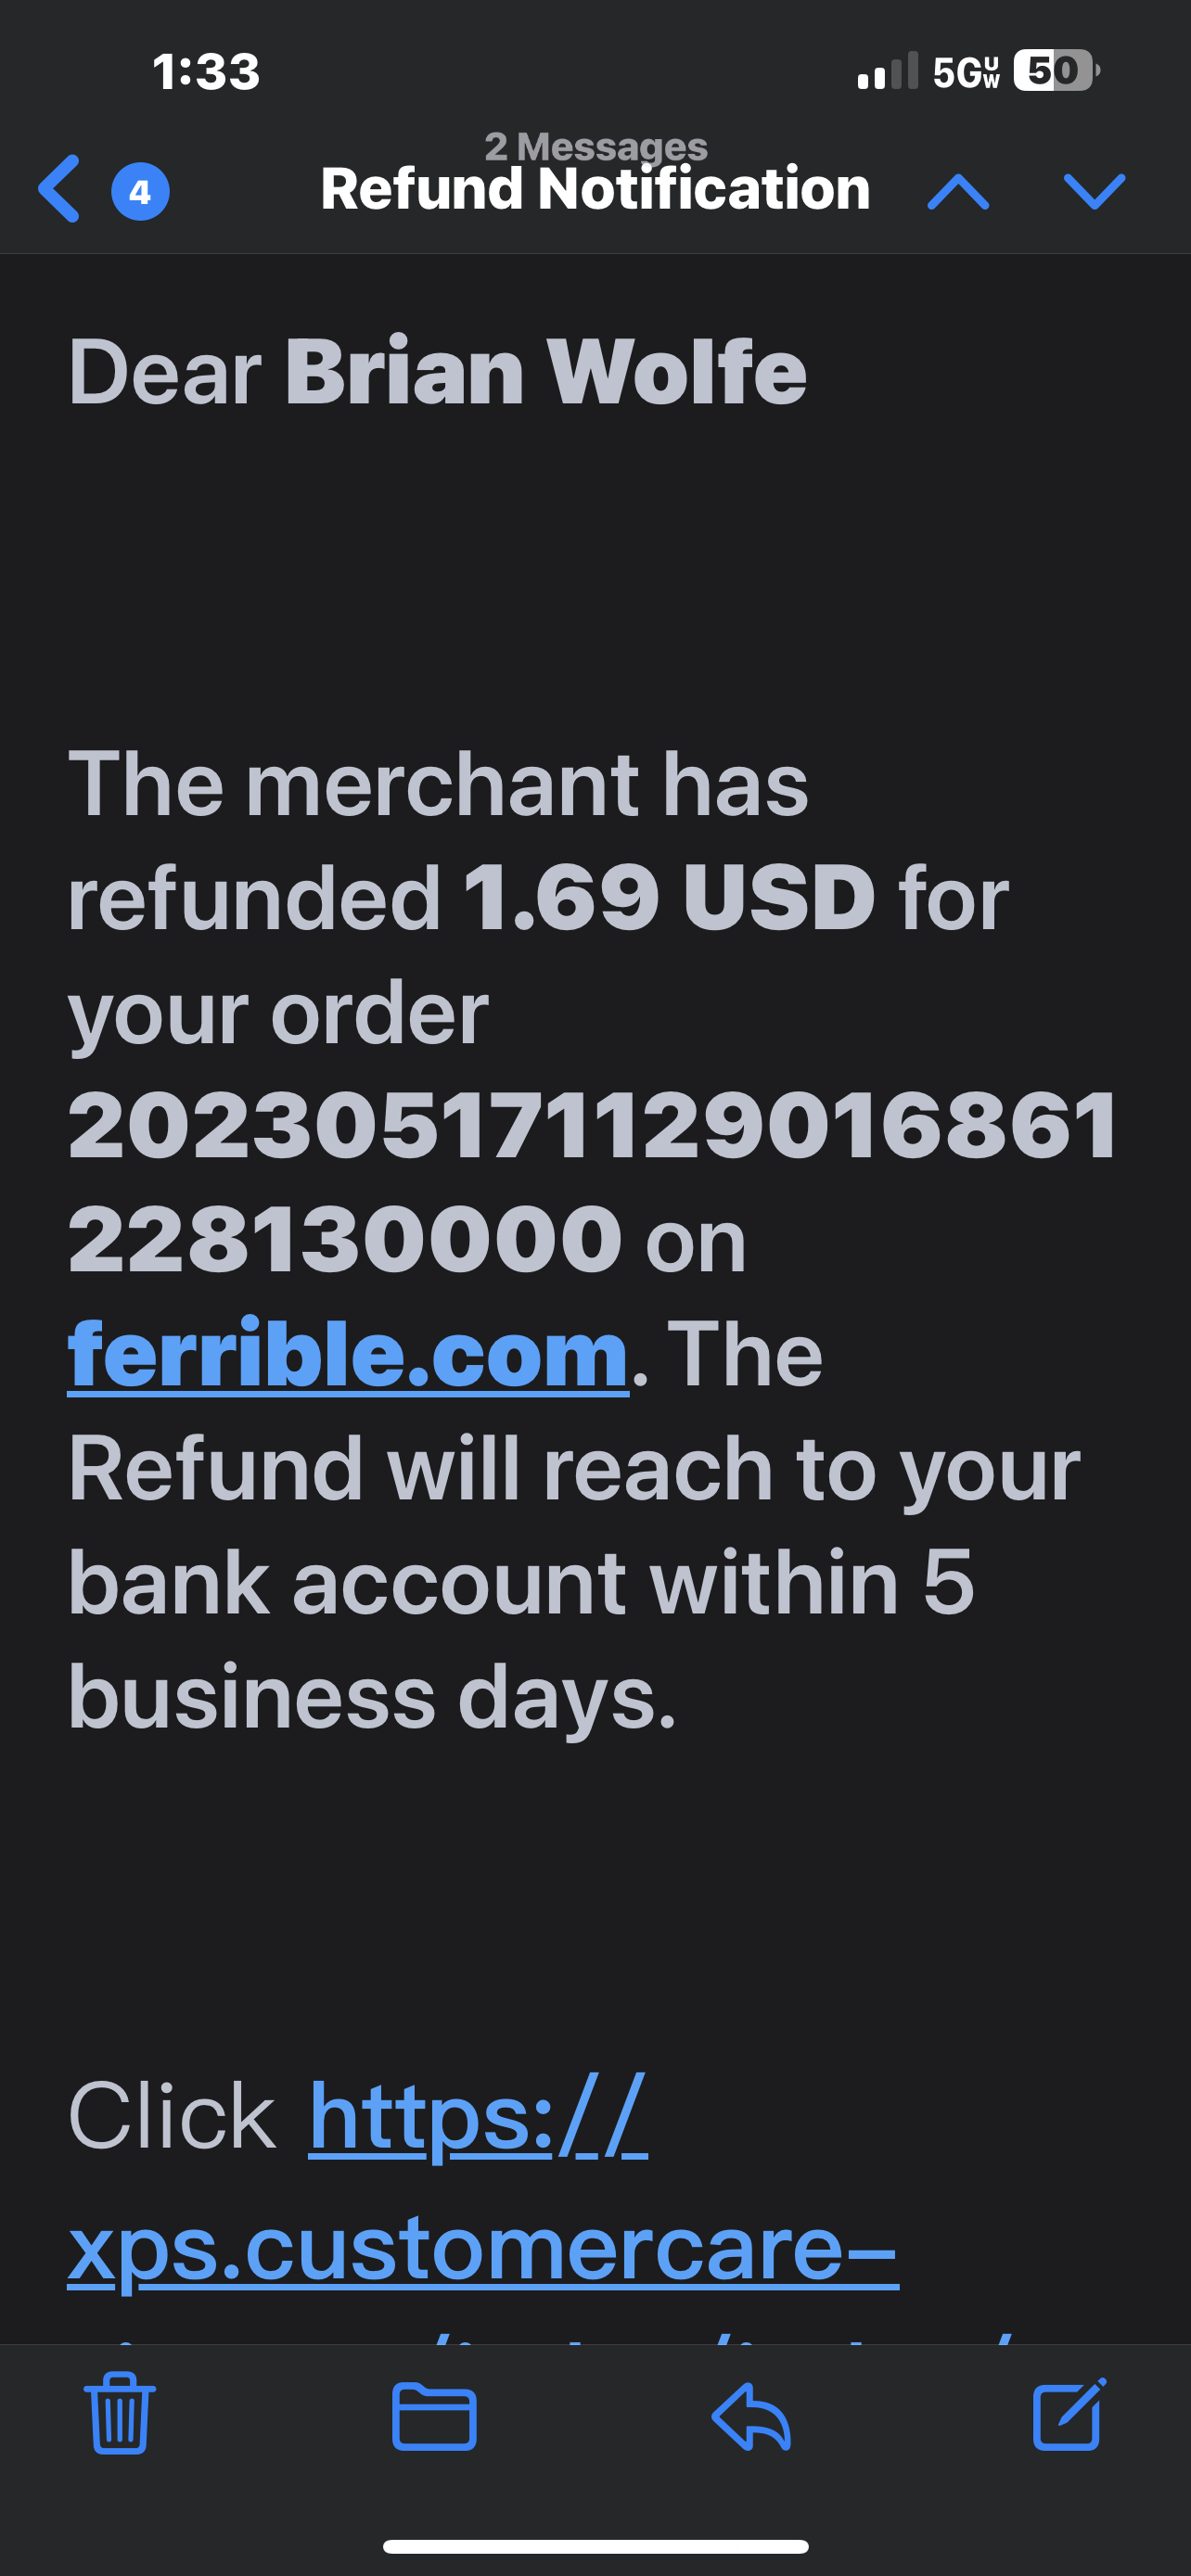 Actual refund given 